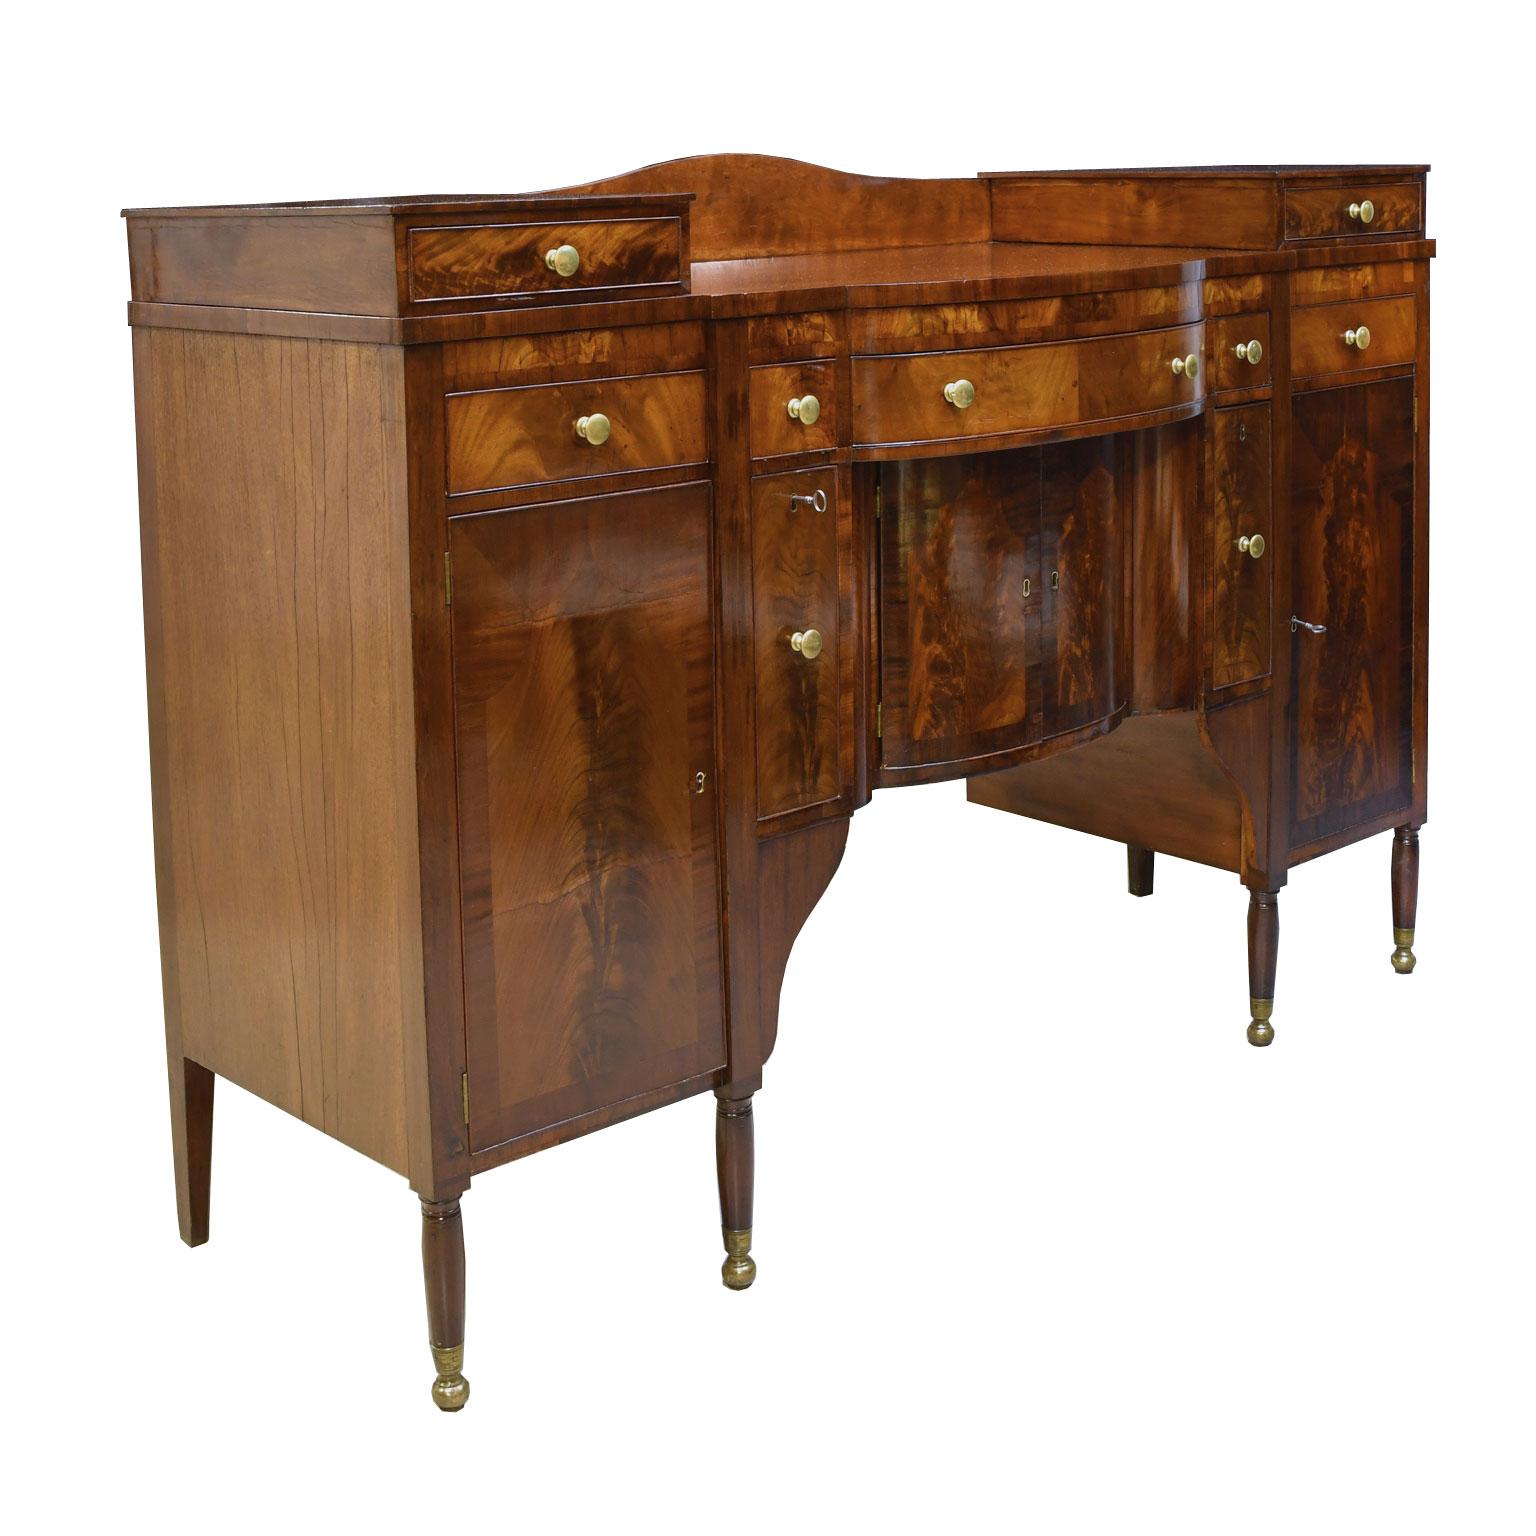 Polished Period Antique American Sheraton Sideboard in Mahogany, circa 1815 For Sale